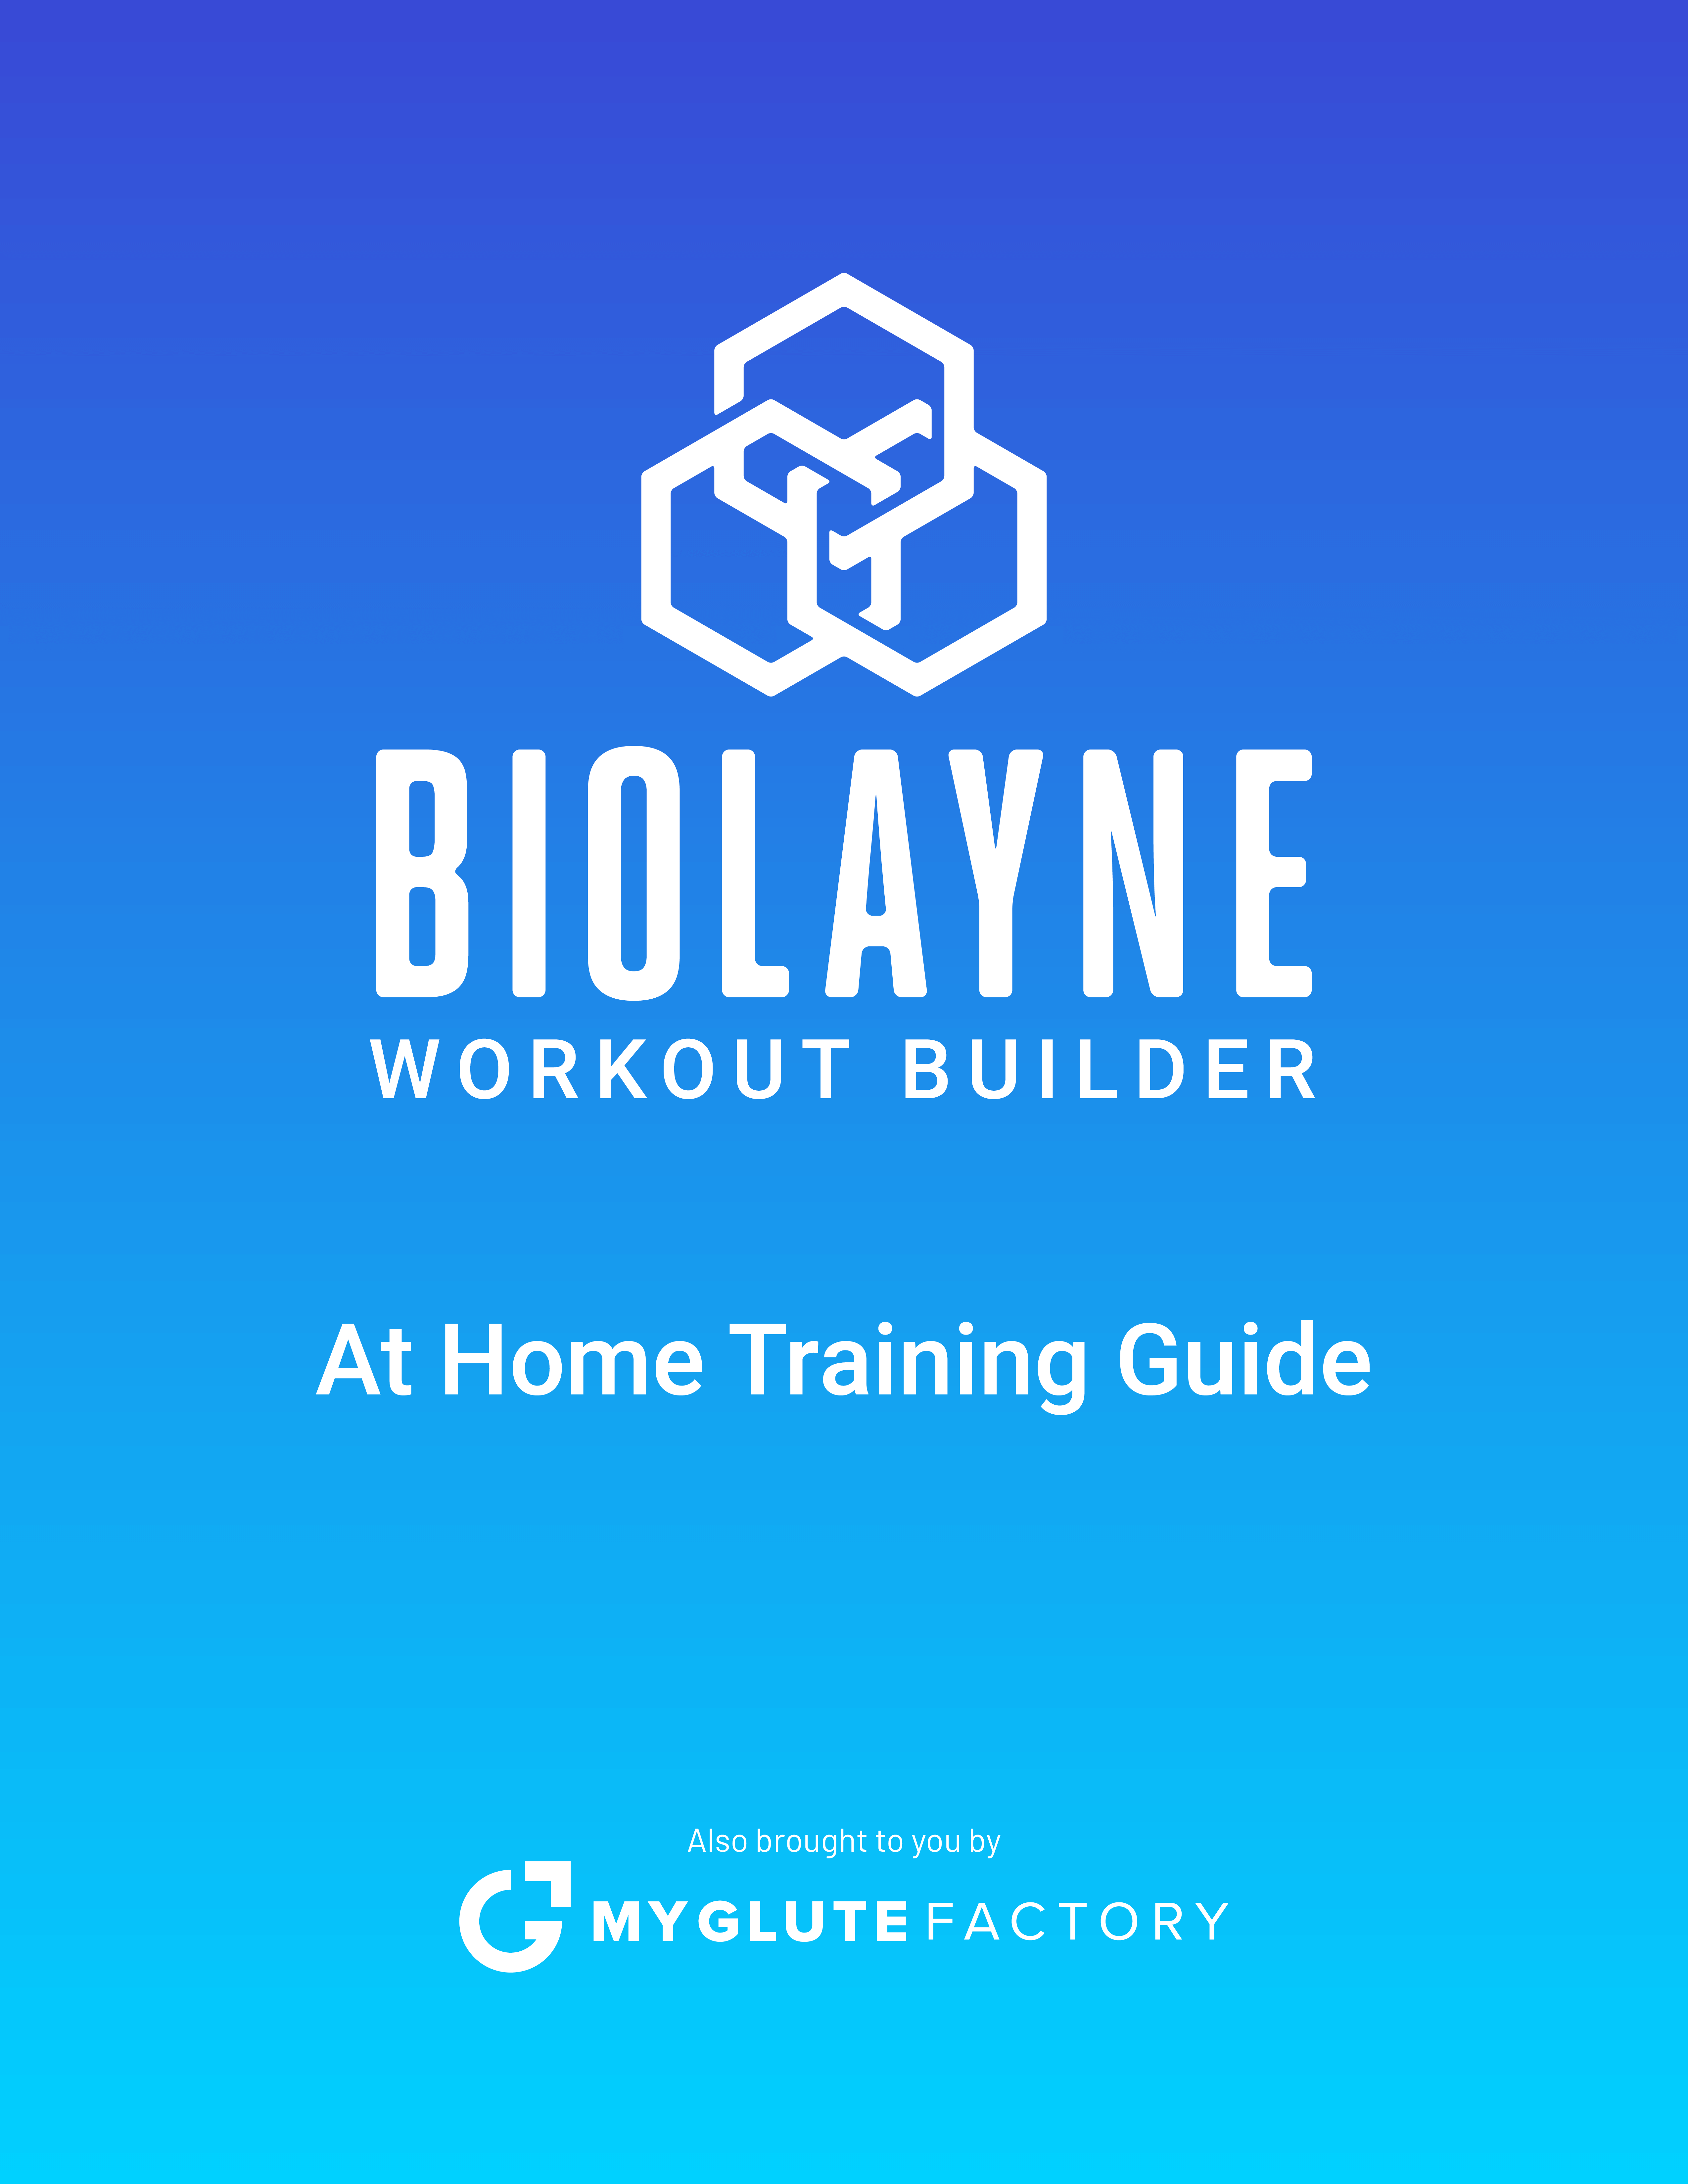 At Home Training Guide